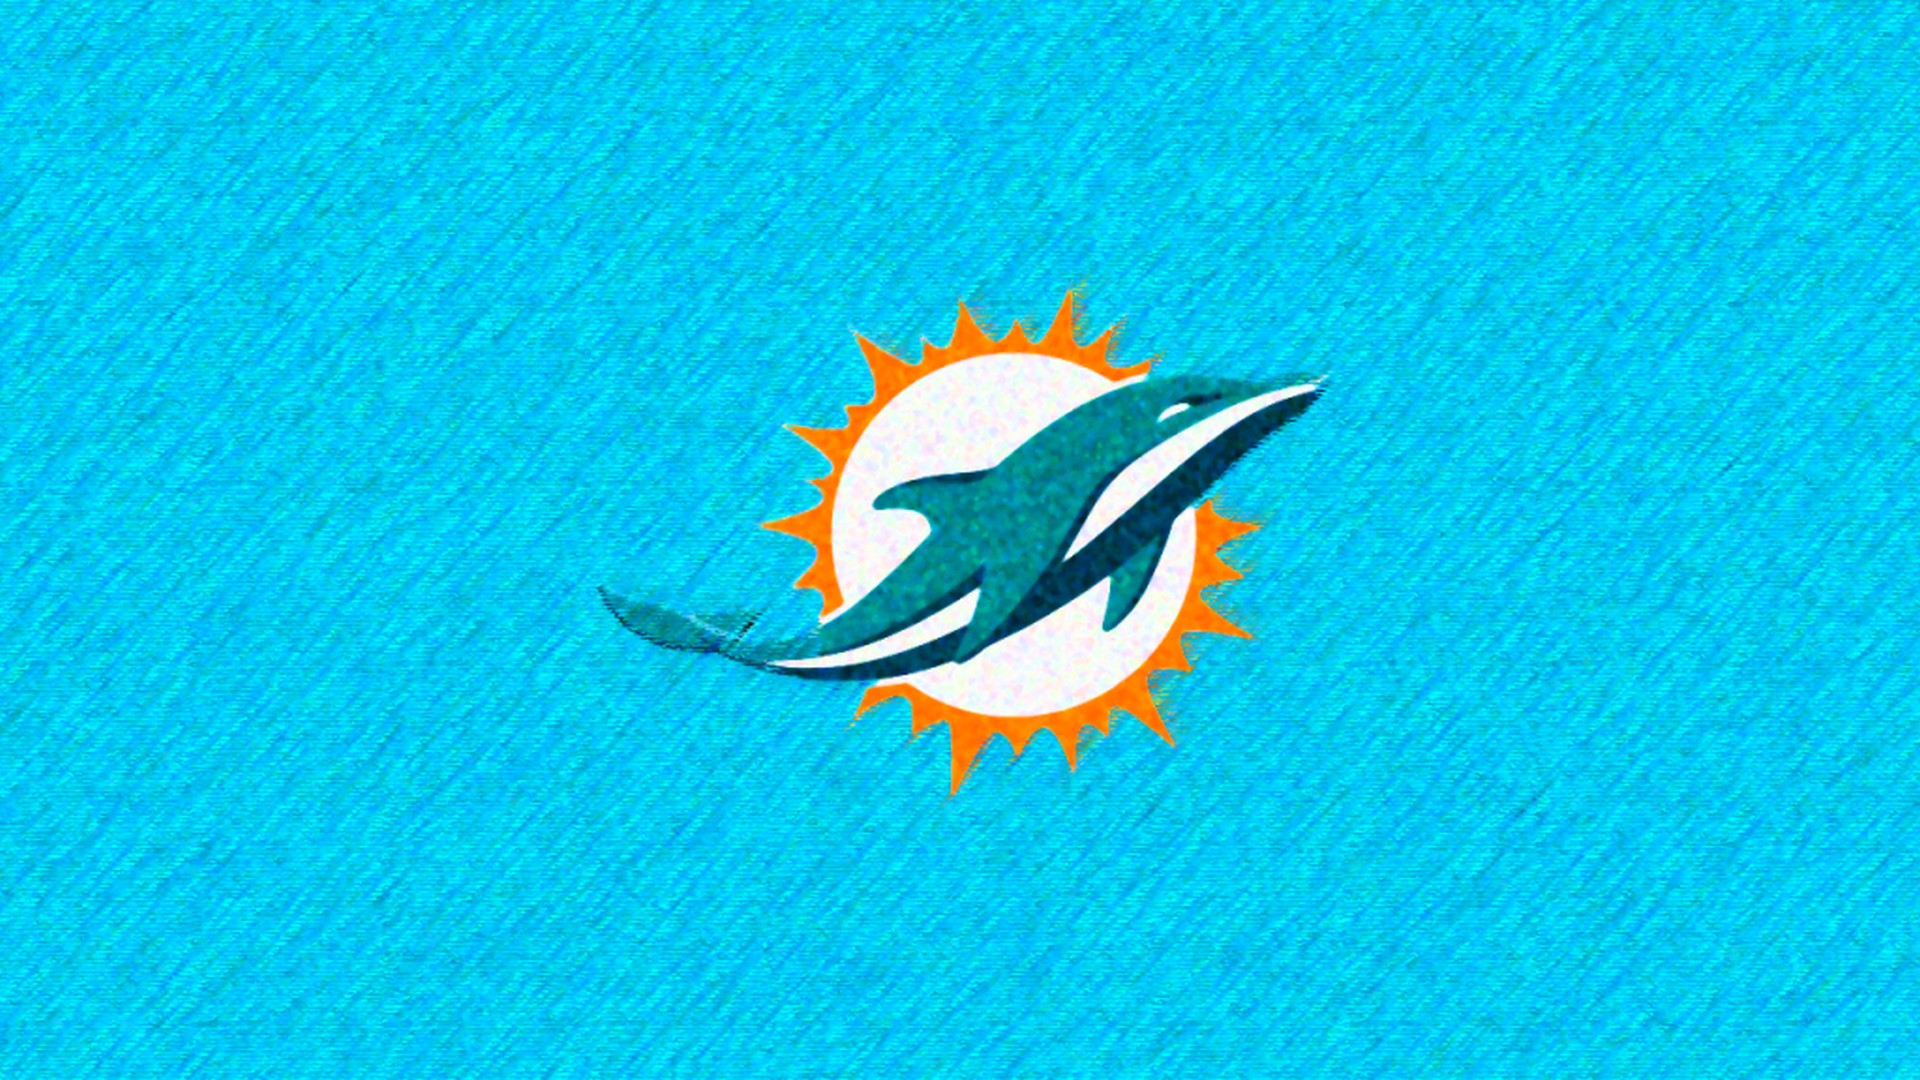 HD Miami Dolphins Backgrounds with resolution 1920x1080 pixel. You can make this wallpaper for your Mac or Windows Desktop Background, iPhone, Android or Tablet and another Smartphone device